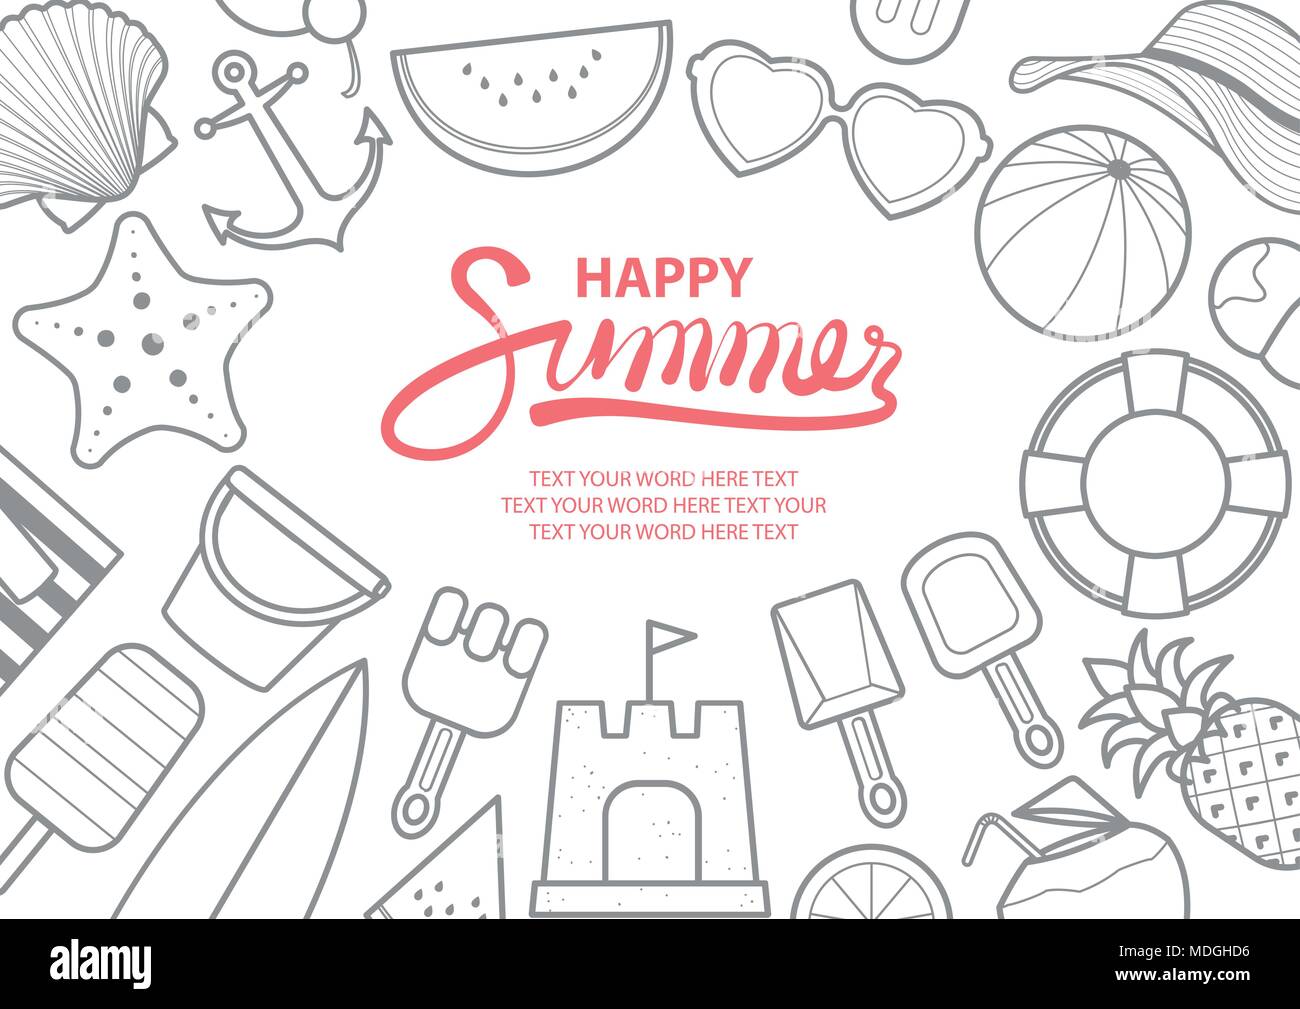 Background design vector illustration for Summer with space for text. Beach stuff in gray outline surround pink text at the middle of picture. Stock Vector